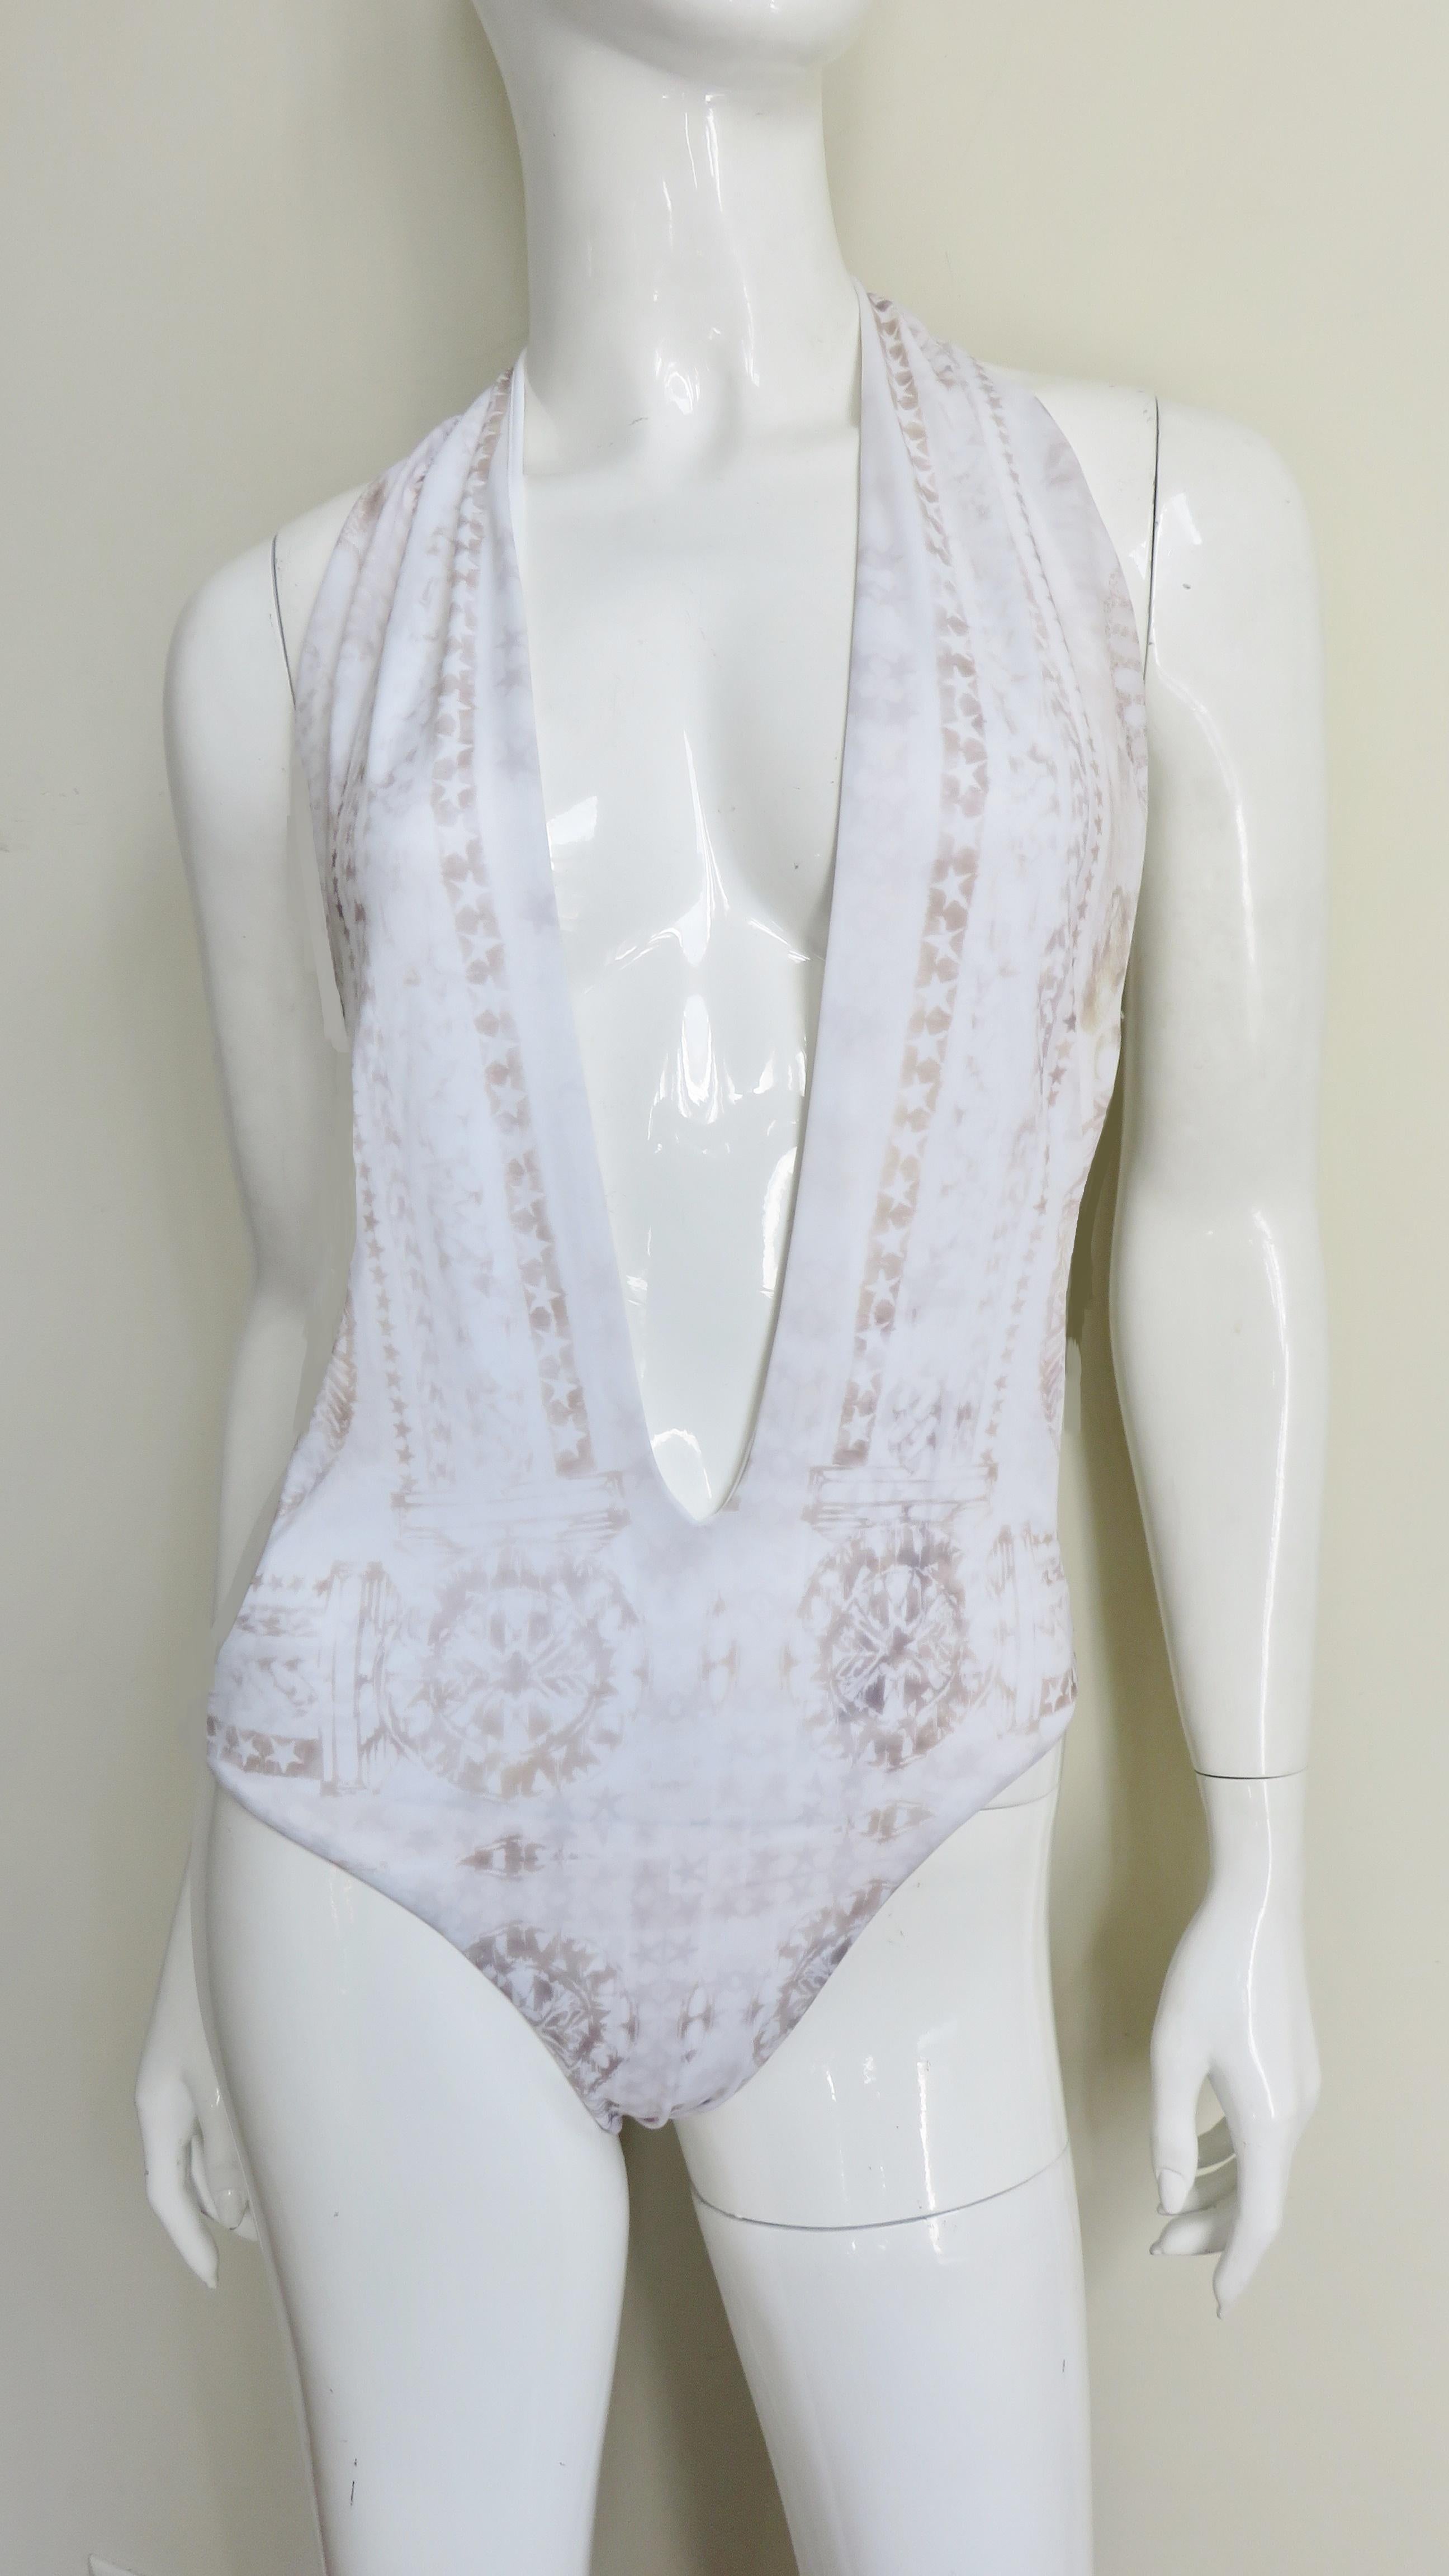 A fabulous plunging front swimsuit in white with a grey abstract geometric pattern from Pierre Balmain.  It has a low plunging neckline closing at the back of the neck with a gold metal clasp and ties at the side bust.
New with tags unworn